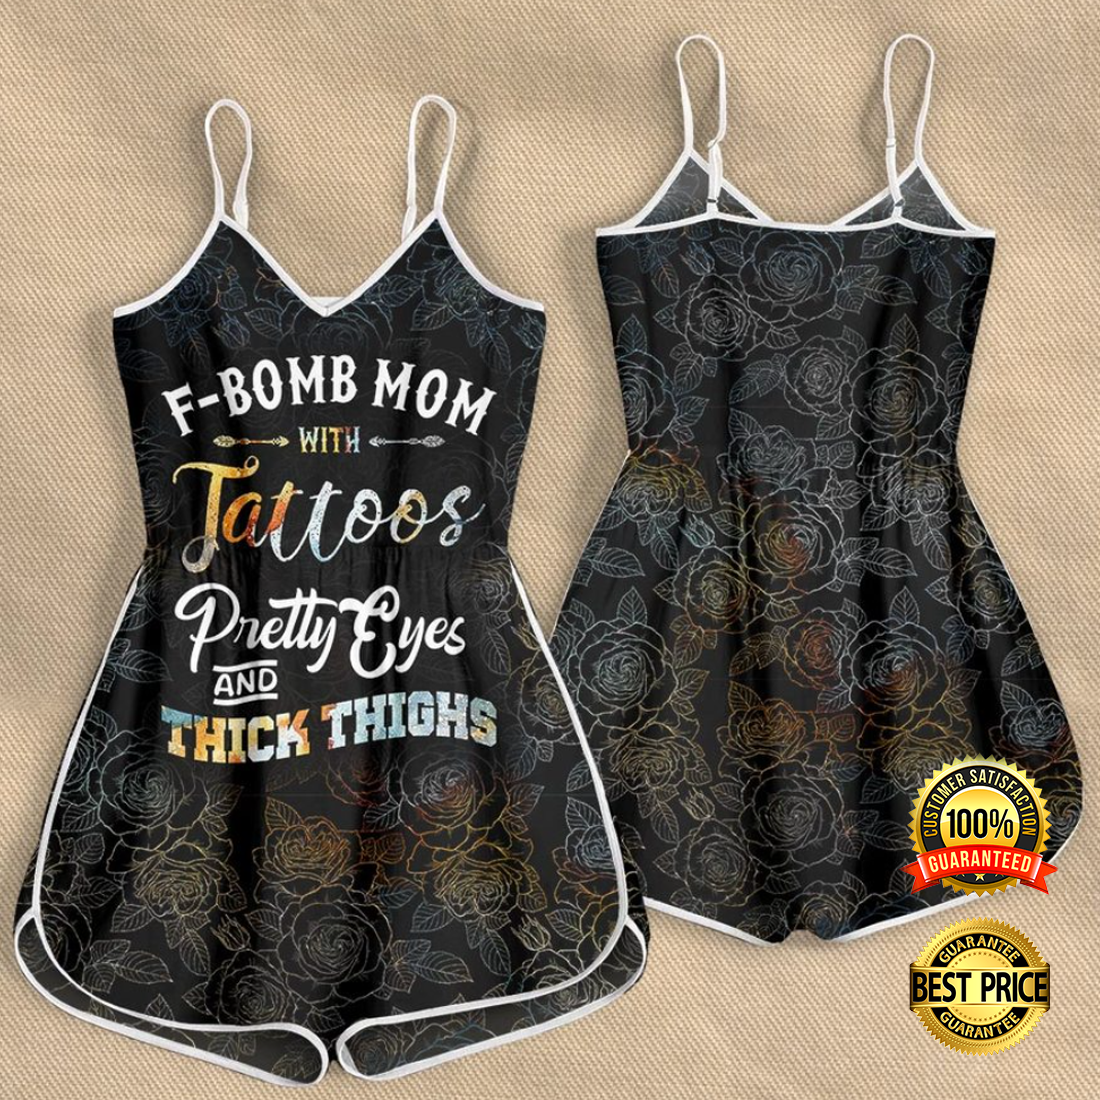 F bomb mom with tattoos pretty eyes and thick thighs romper 4